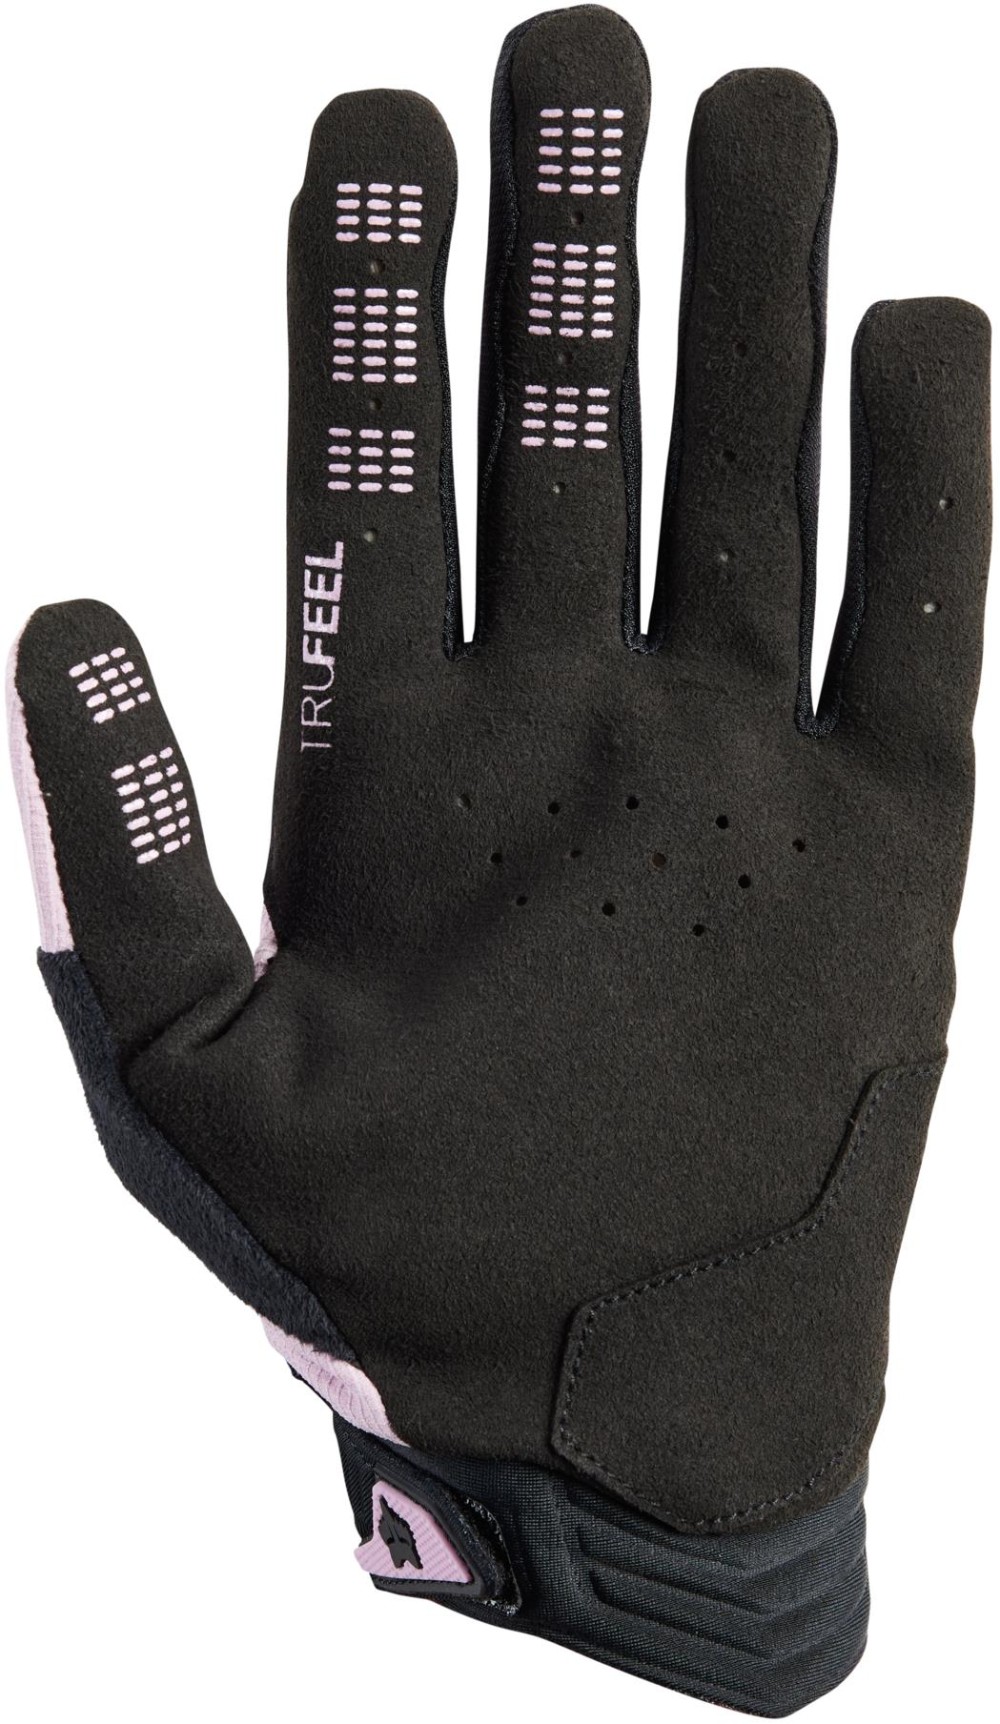 Defend Womens Long Finger Cycling Gloves TS57 image 1